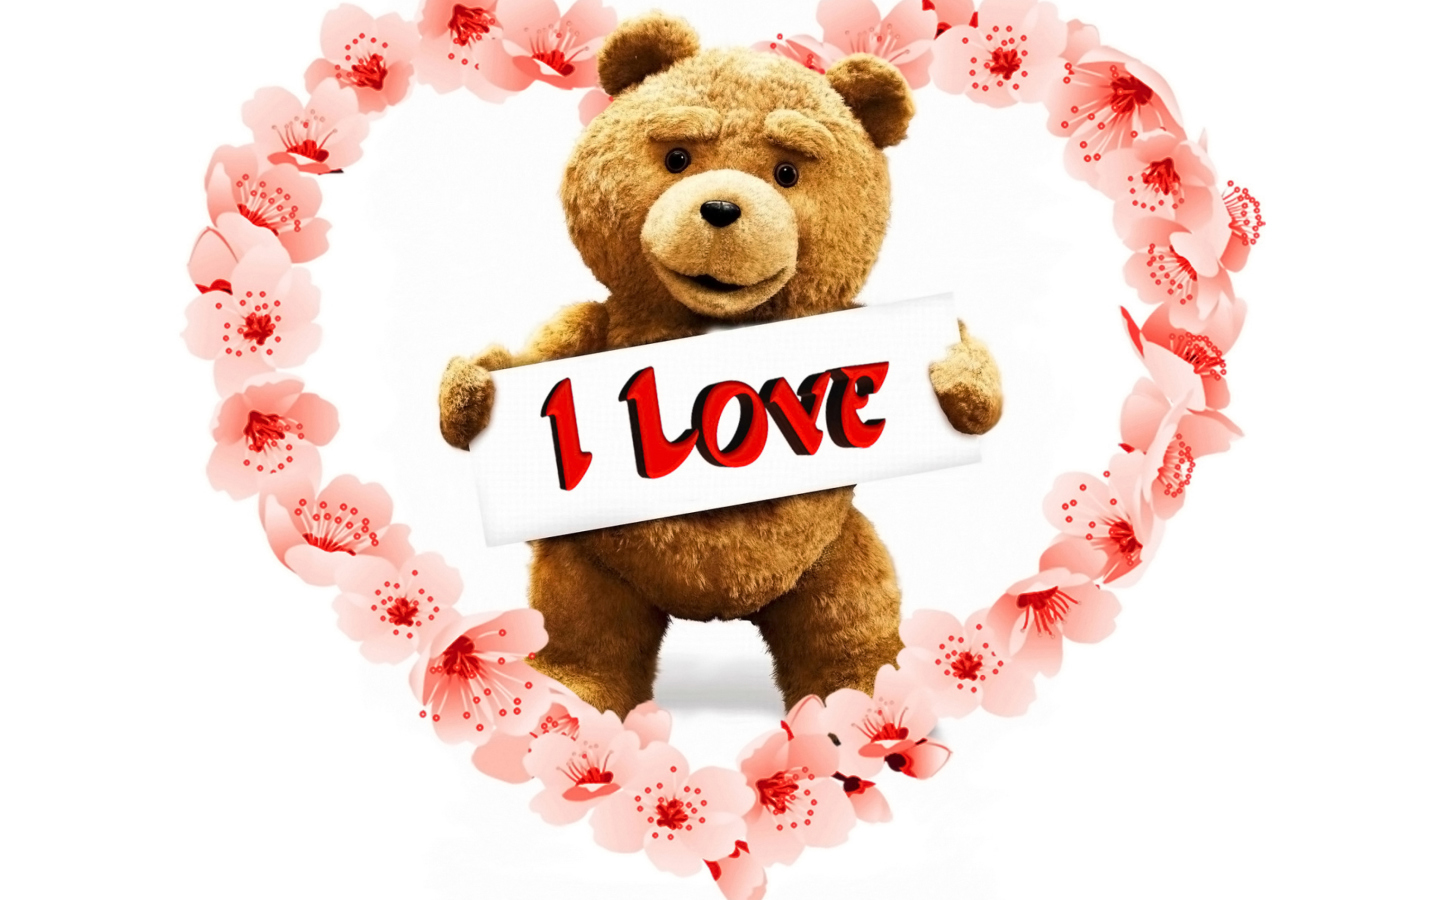 Love Ted wallpaper 1440x900